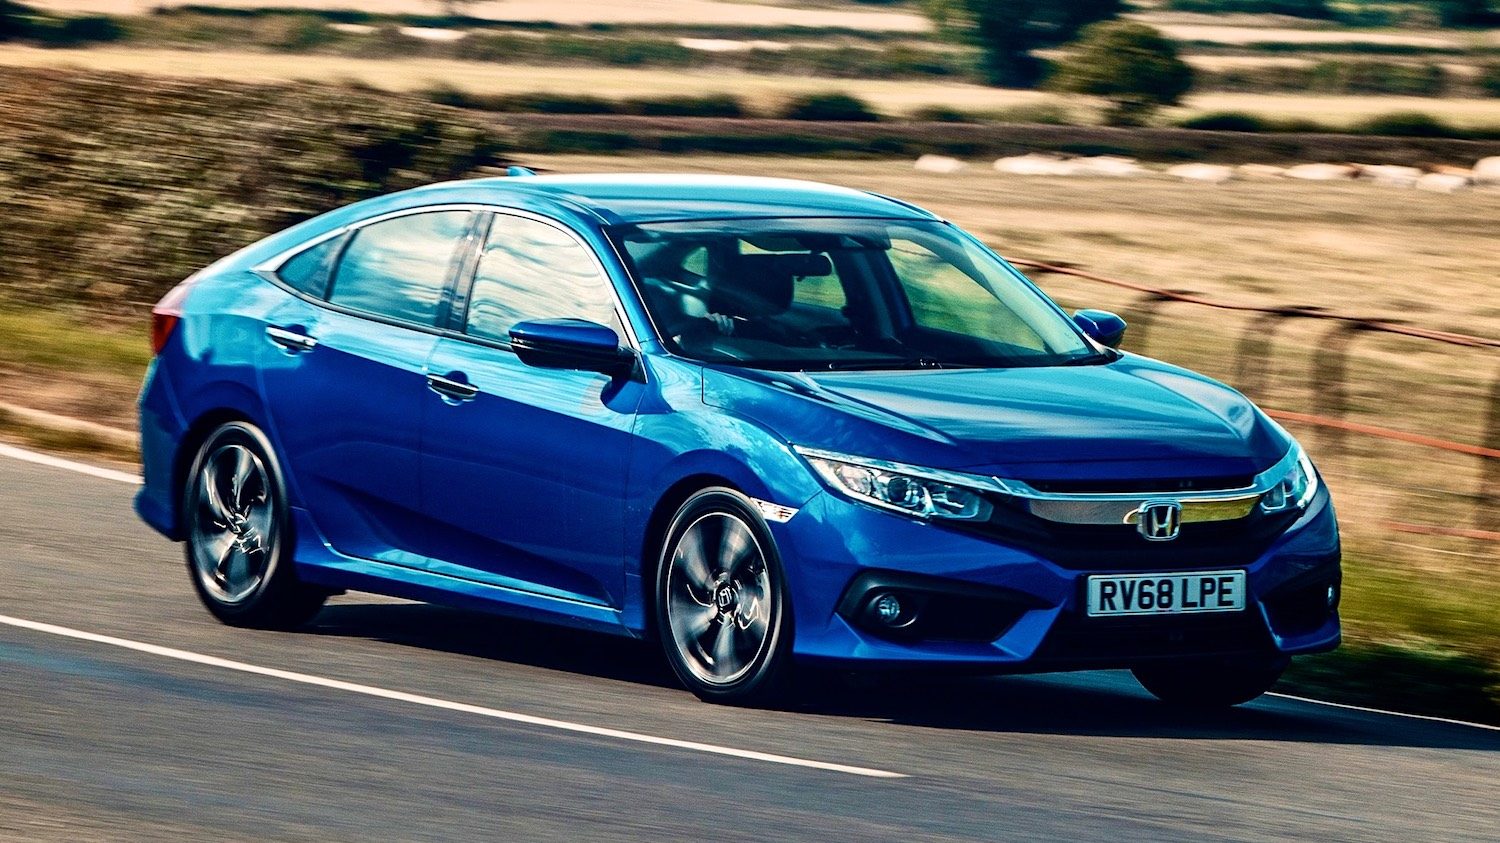 All About Honda Civic 2019 Price In Pakistan, Features ...